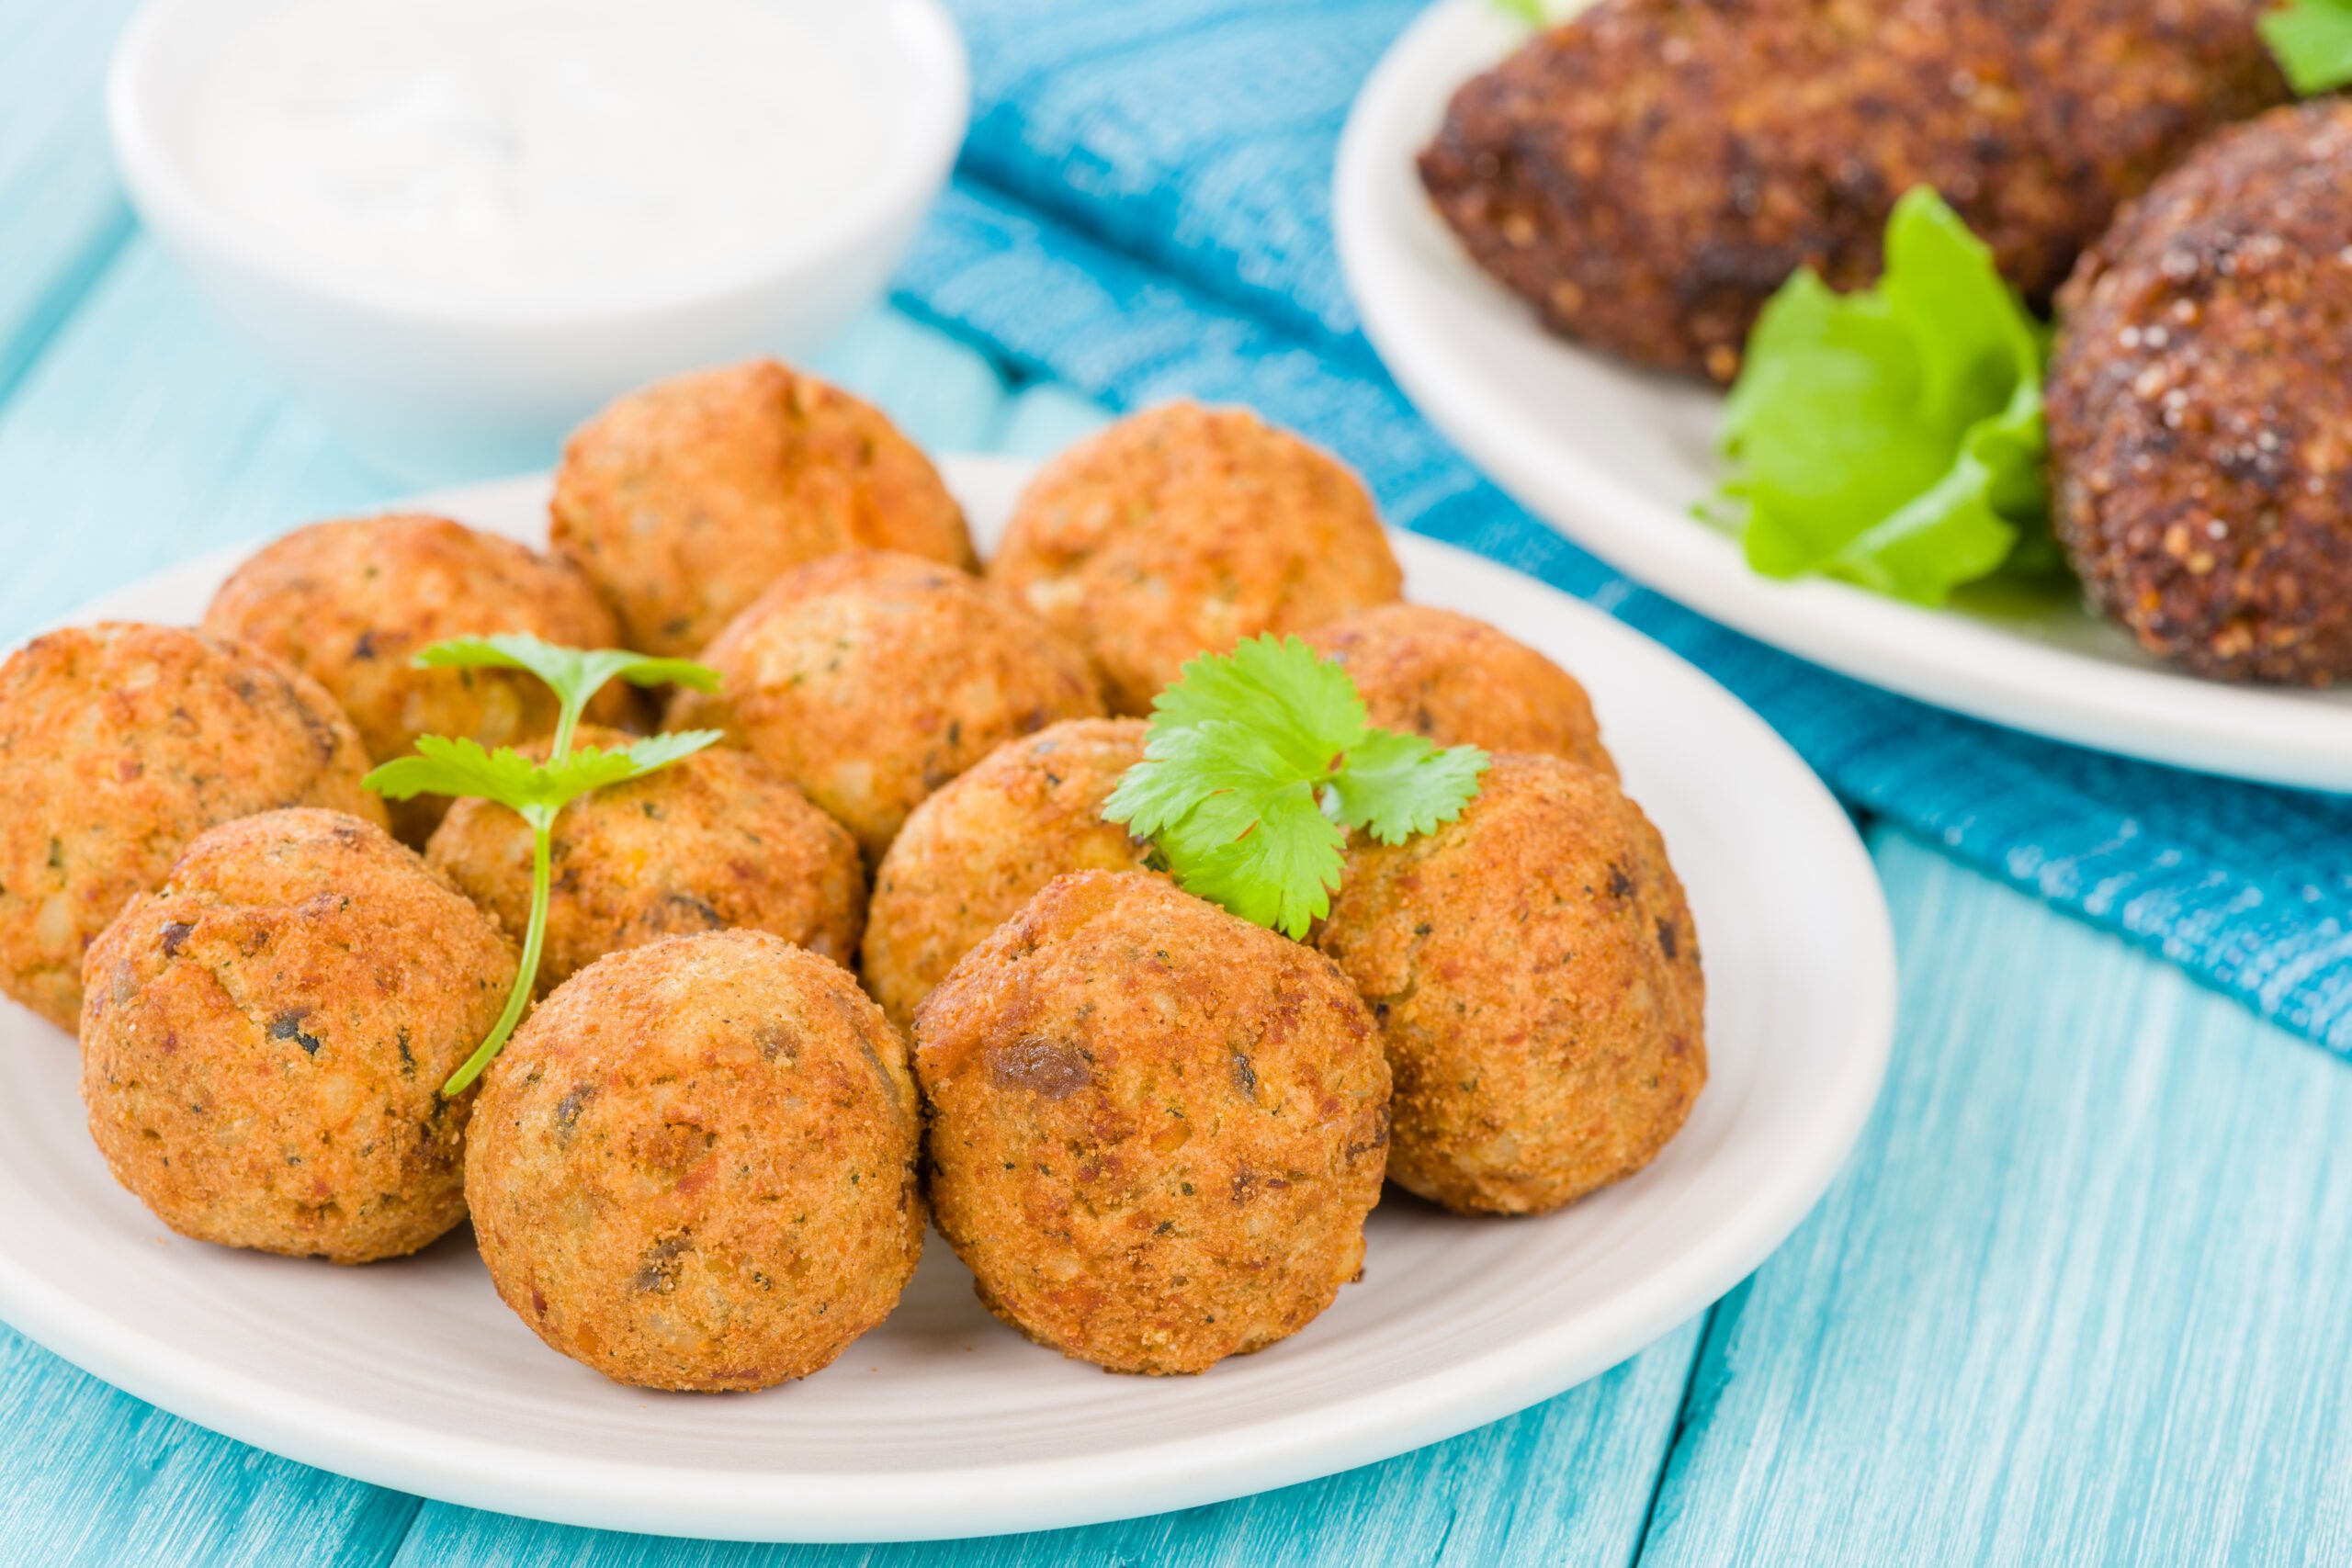 Falafel - Middle Eastern chickpea and fava beans fried balls